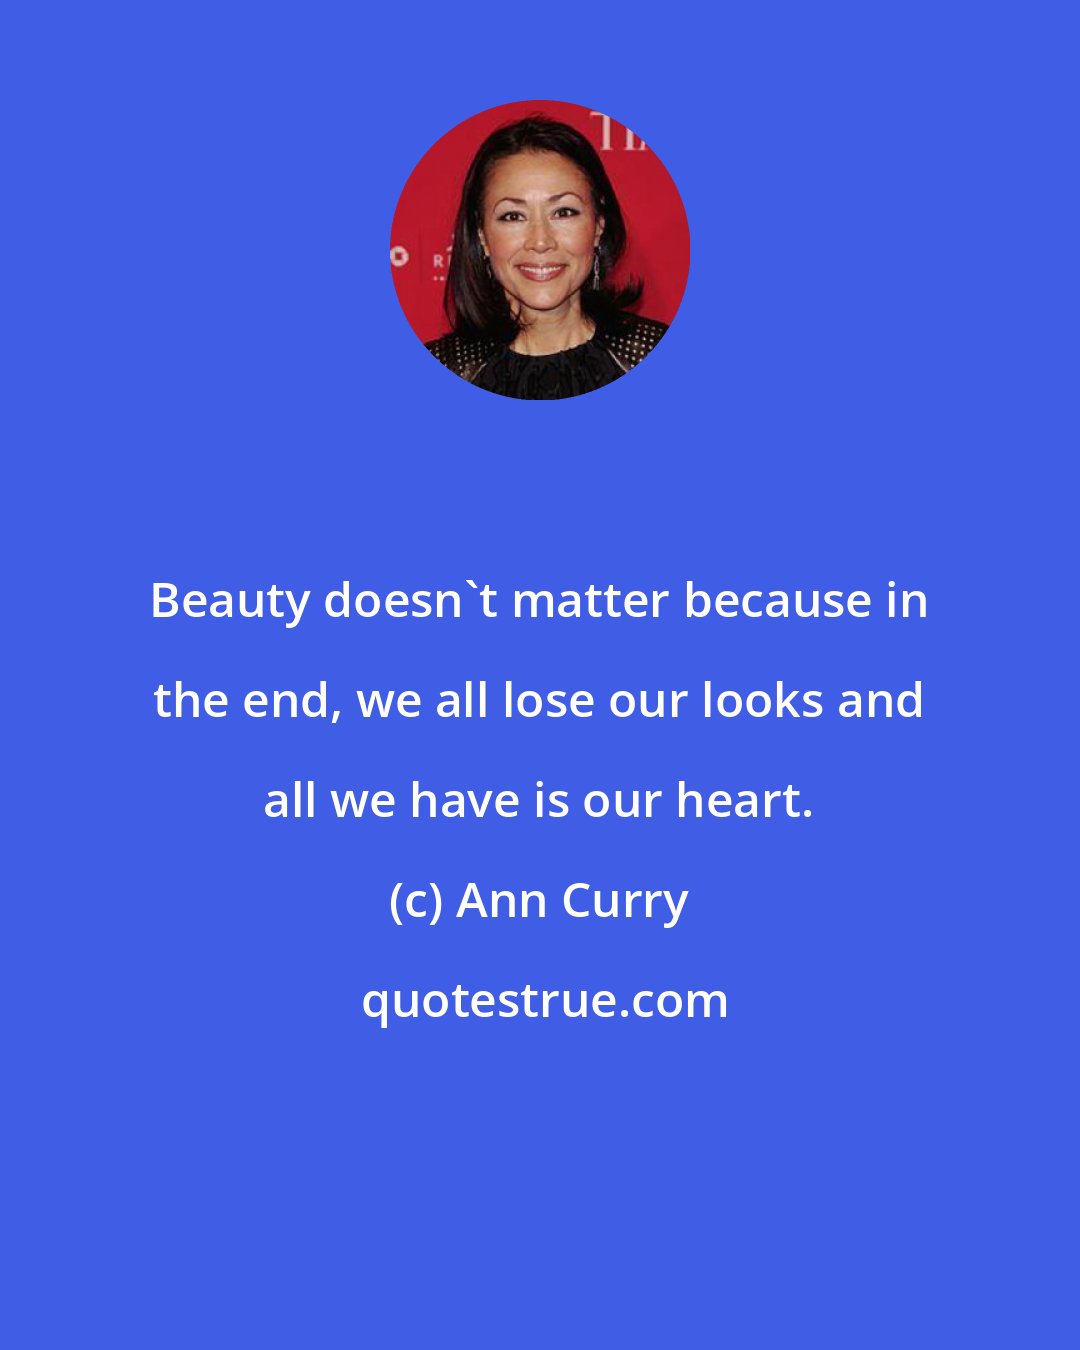 Ann Curry: Beauty doesn't matter because in the end, we all lose our looks and all we have is our heart.